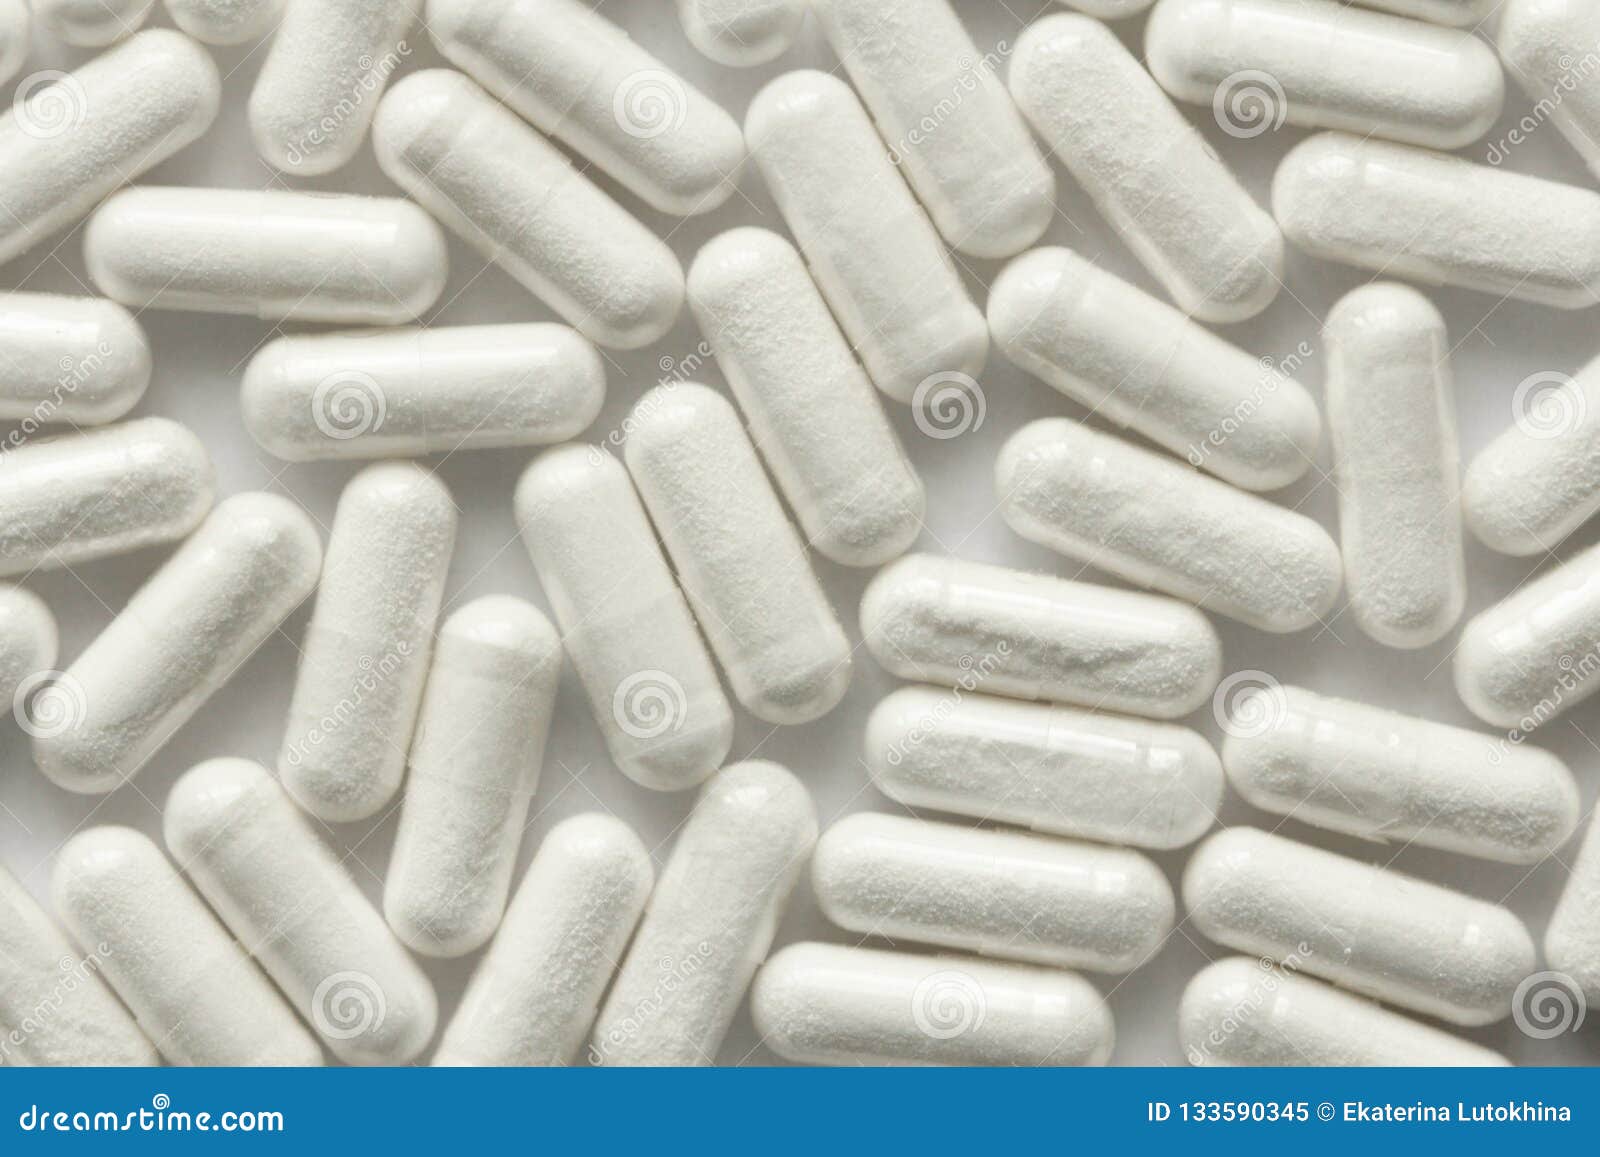 white transparent capsules or tablets on the white background. m